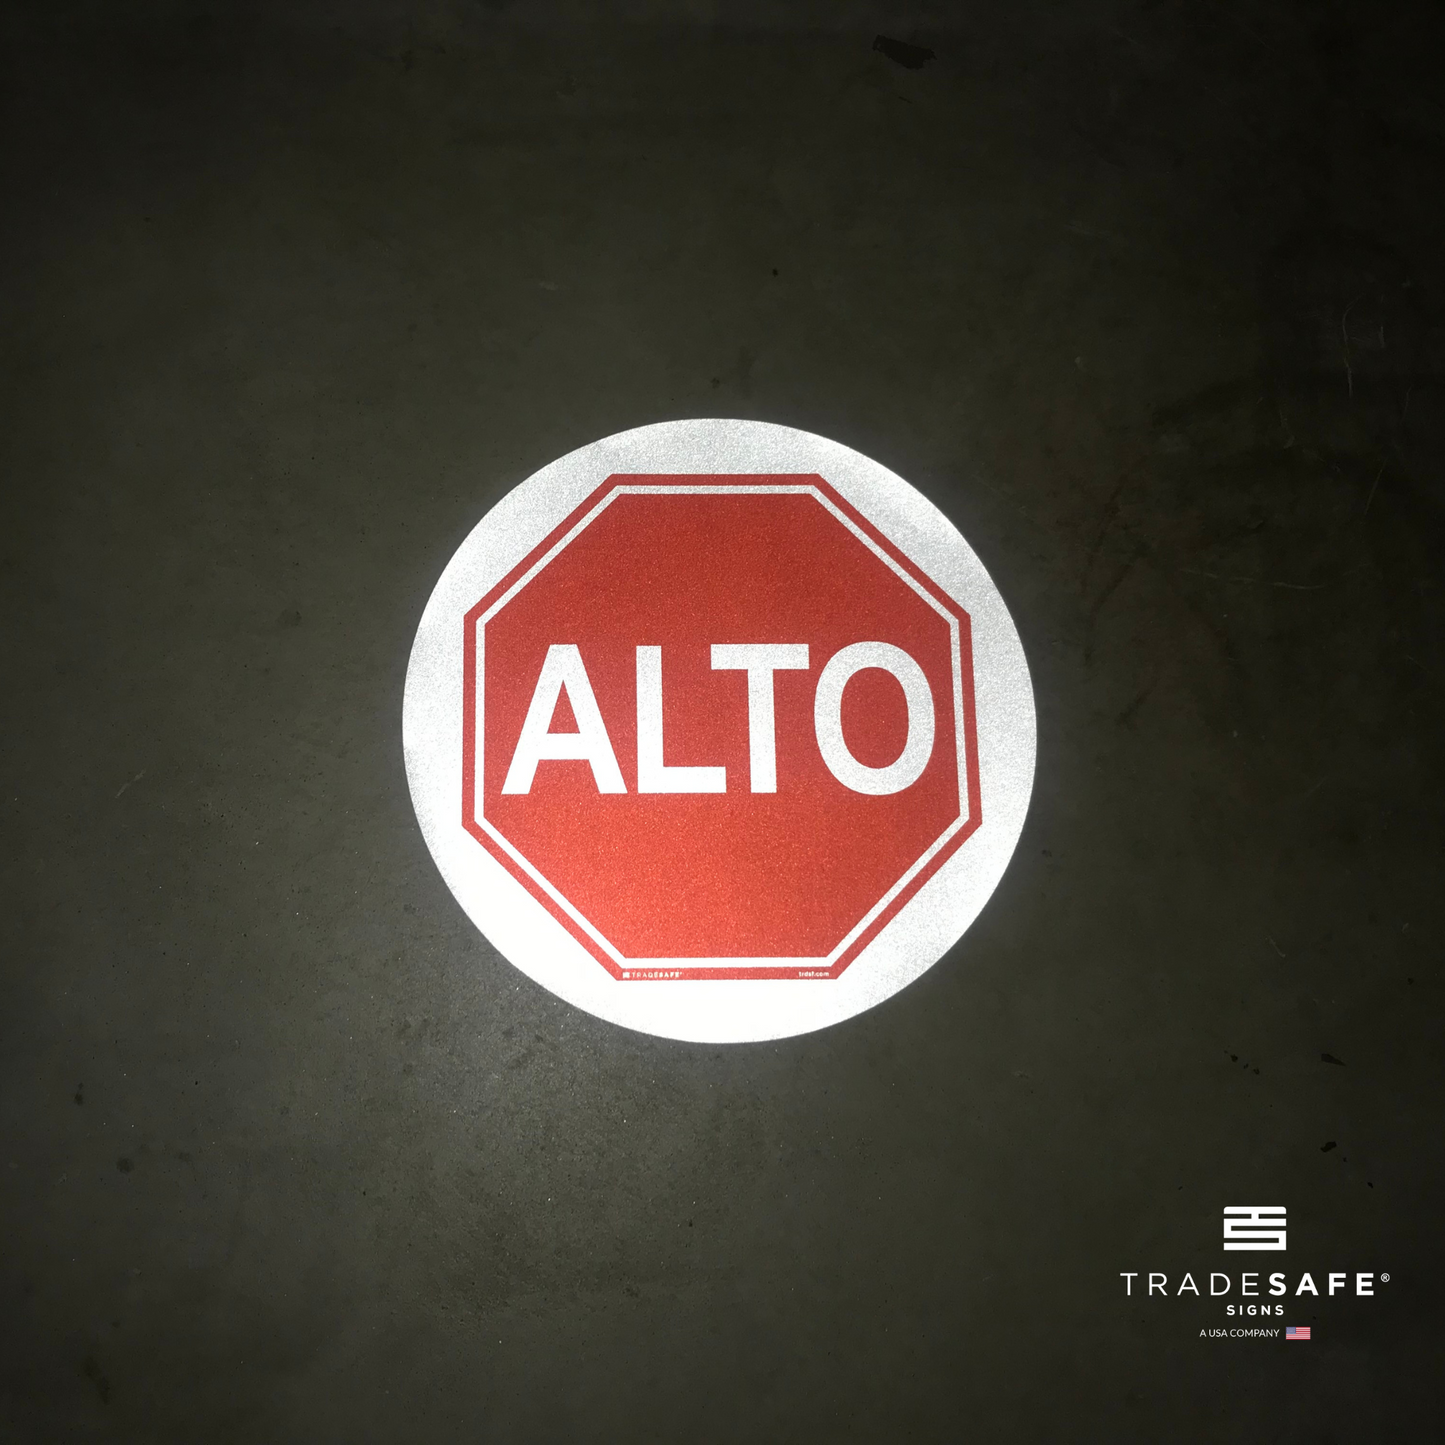 reflective attribute of alto sign on black background